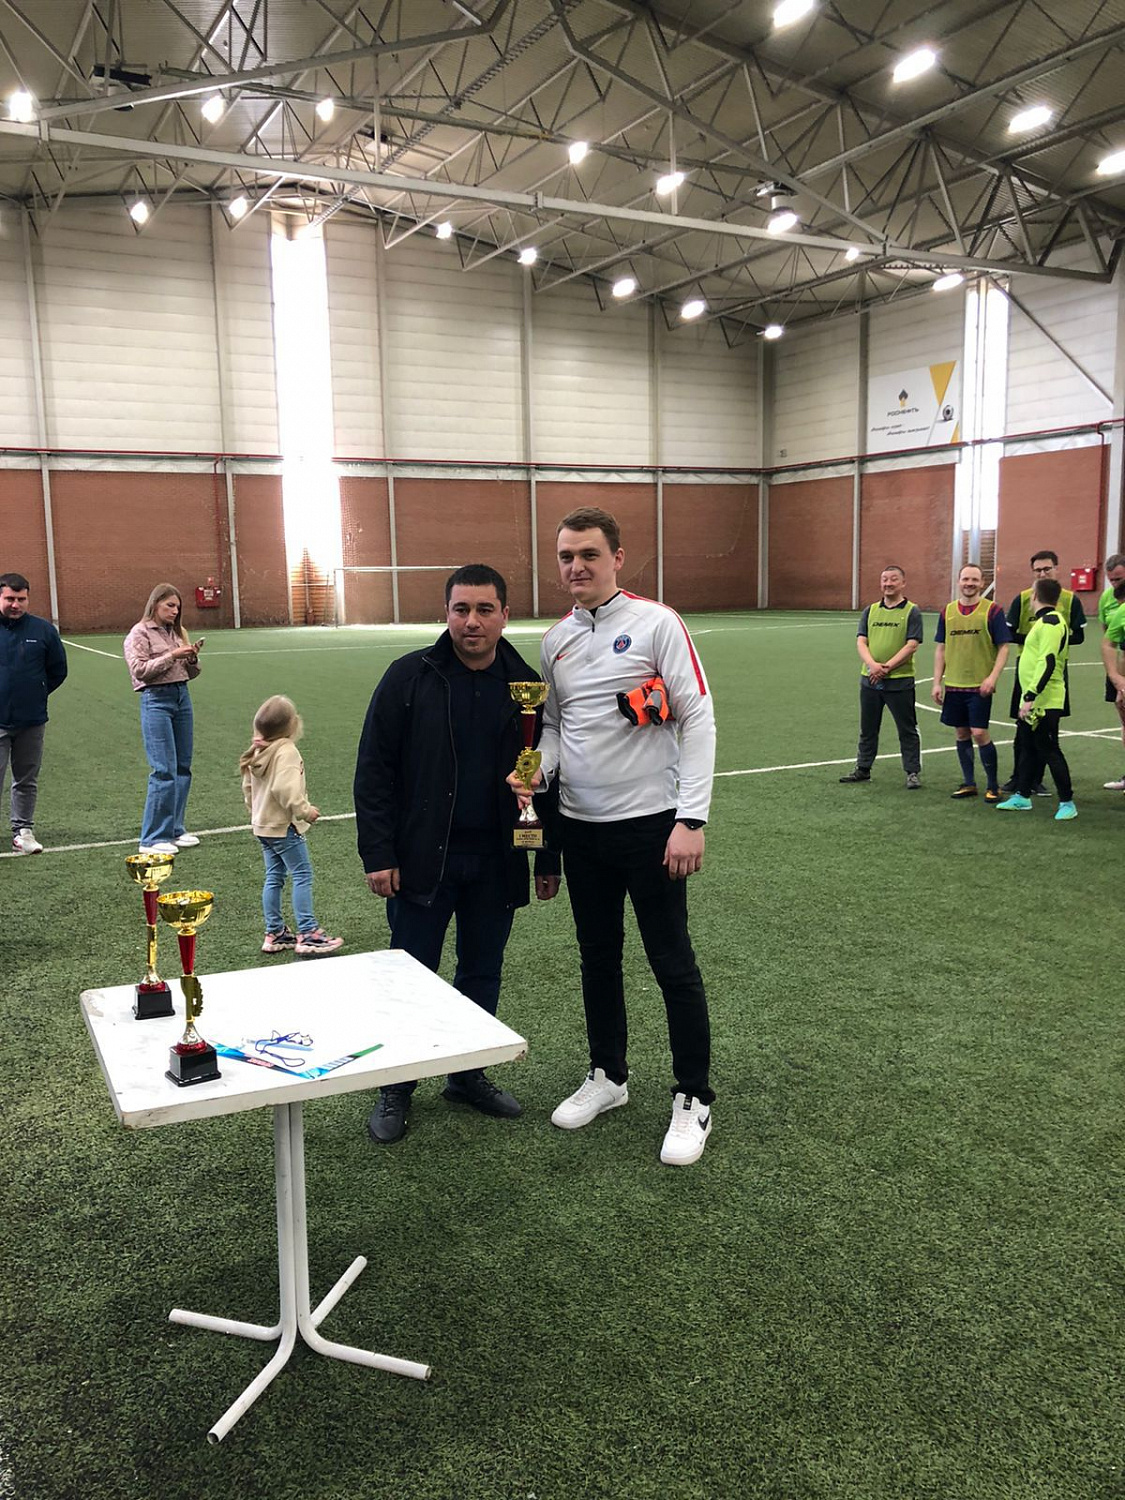 On April 30, a football match took place in Syzran